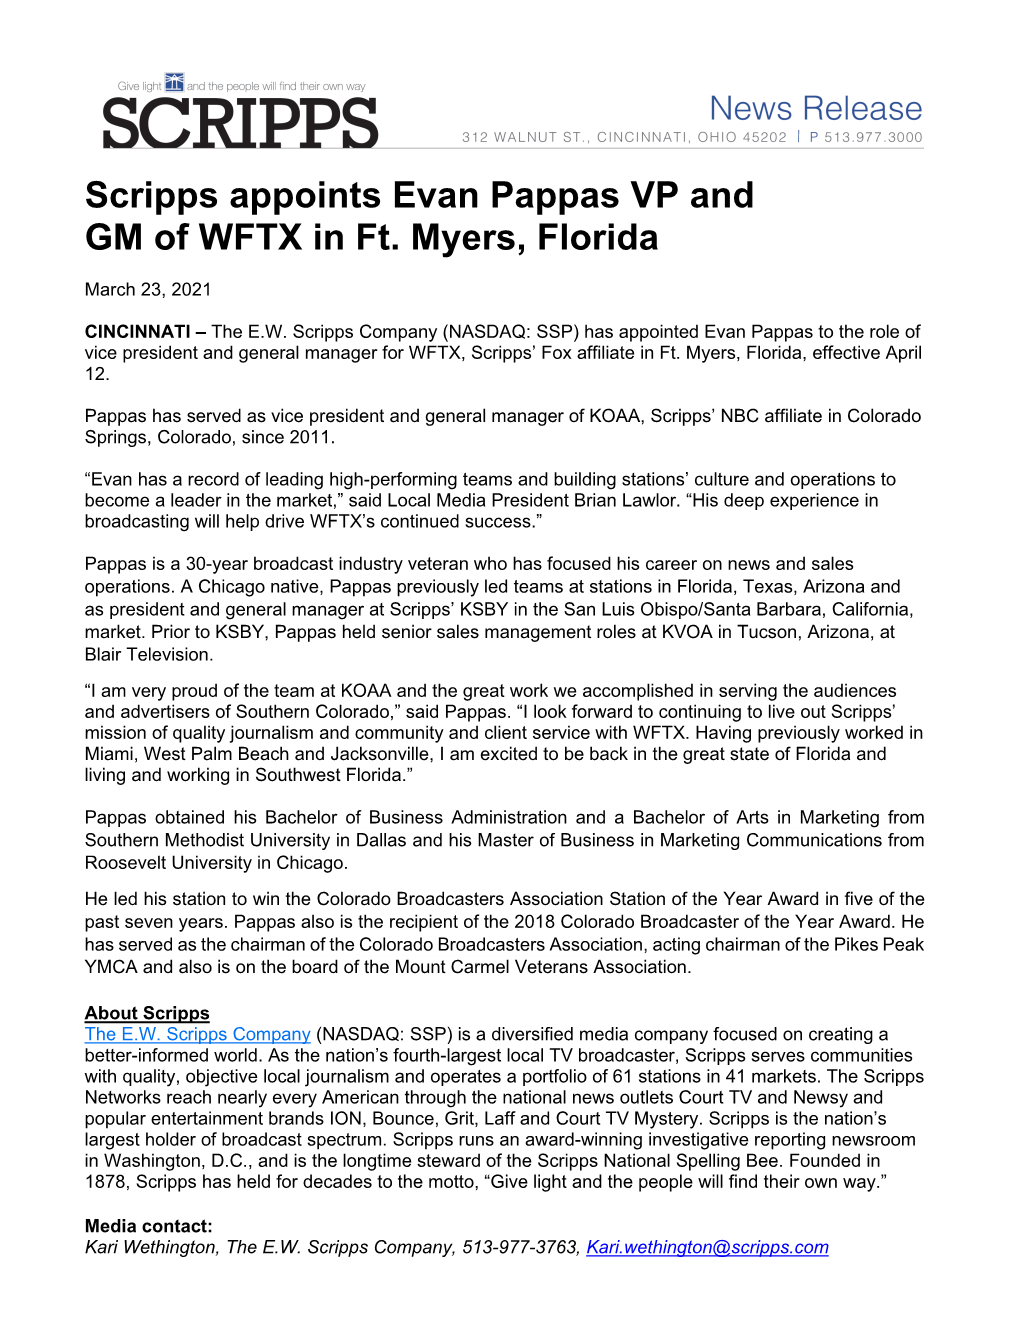 Scripps Appoints Evan Pappas VP and GM of WFTX in Ft. Myers, Florida